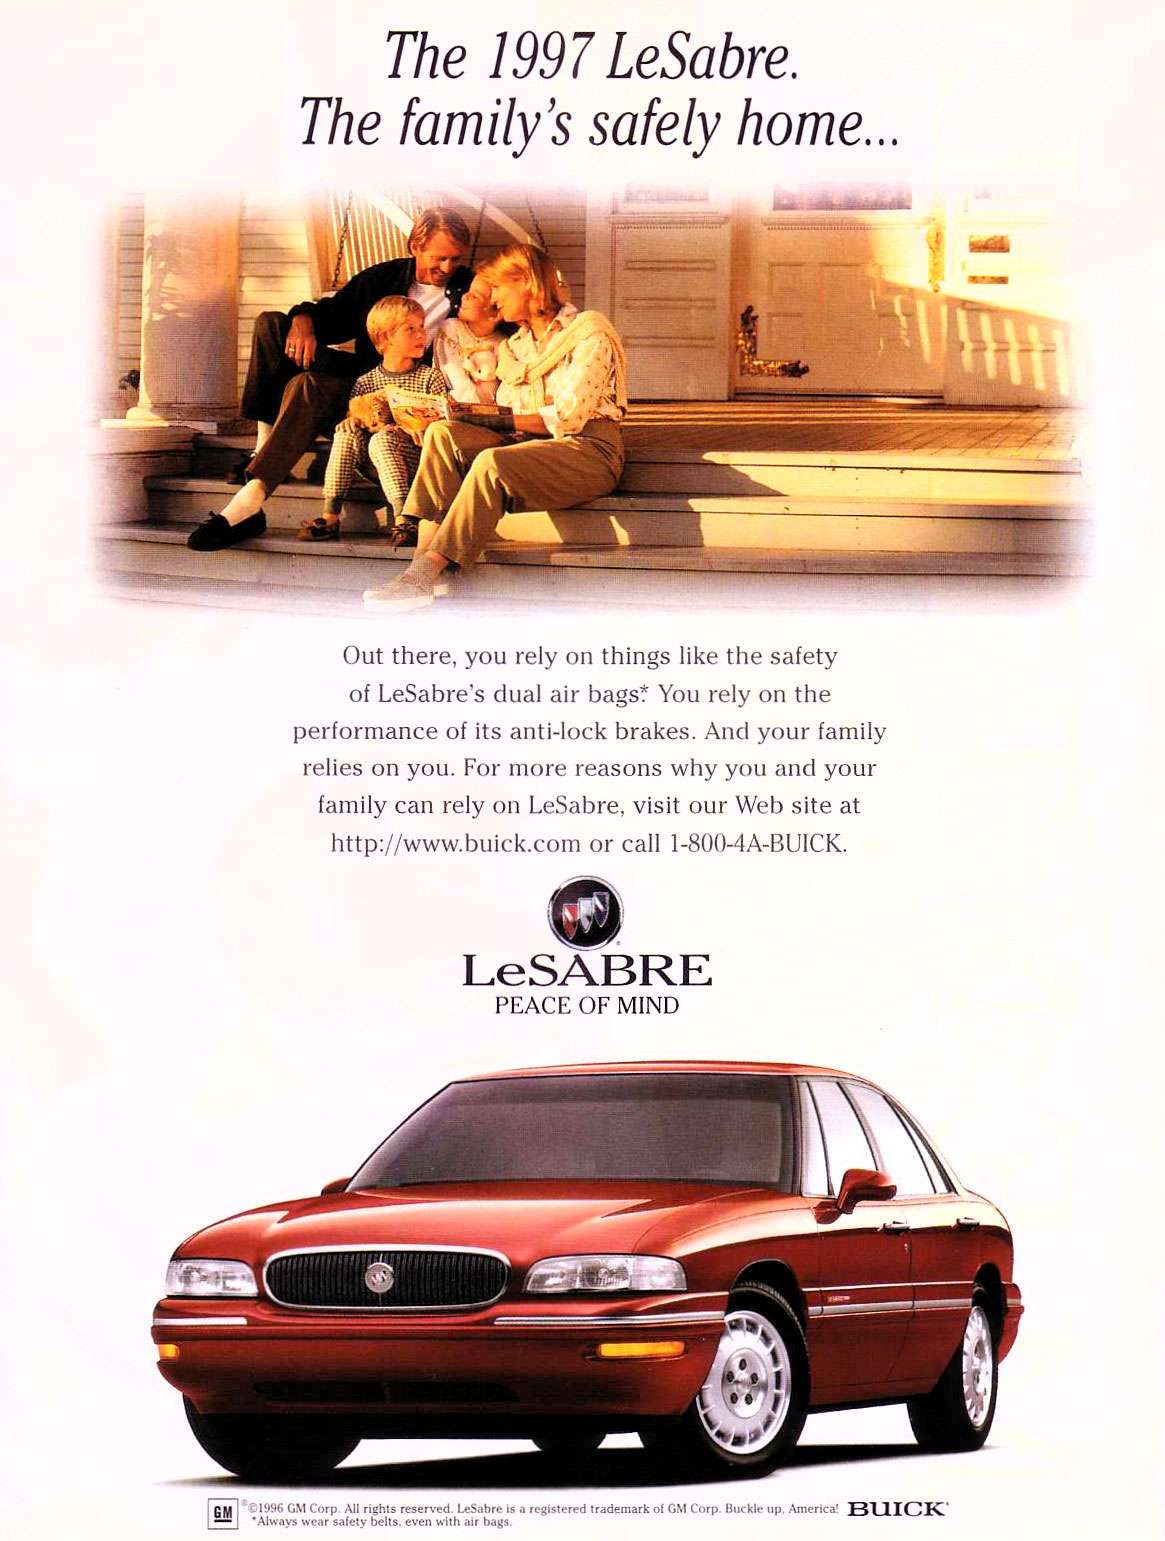 The 1997 Buick LeSabre. The family's safely home... Out there, you rely on things like the safety of LeSabre's dual air bags': You rely on the performance of its anti-lock brakes. And your family relies on you. For more reasons why you and your family can rely on LeSabre, visit our Web site at http://www.buick.com or call 1-800-4A-BUICK. LeSABRE PEACE OF MIND 